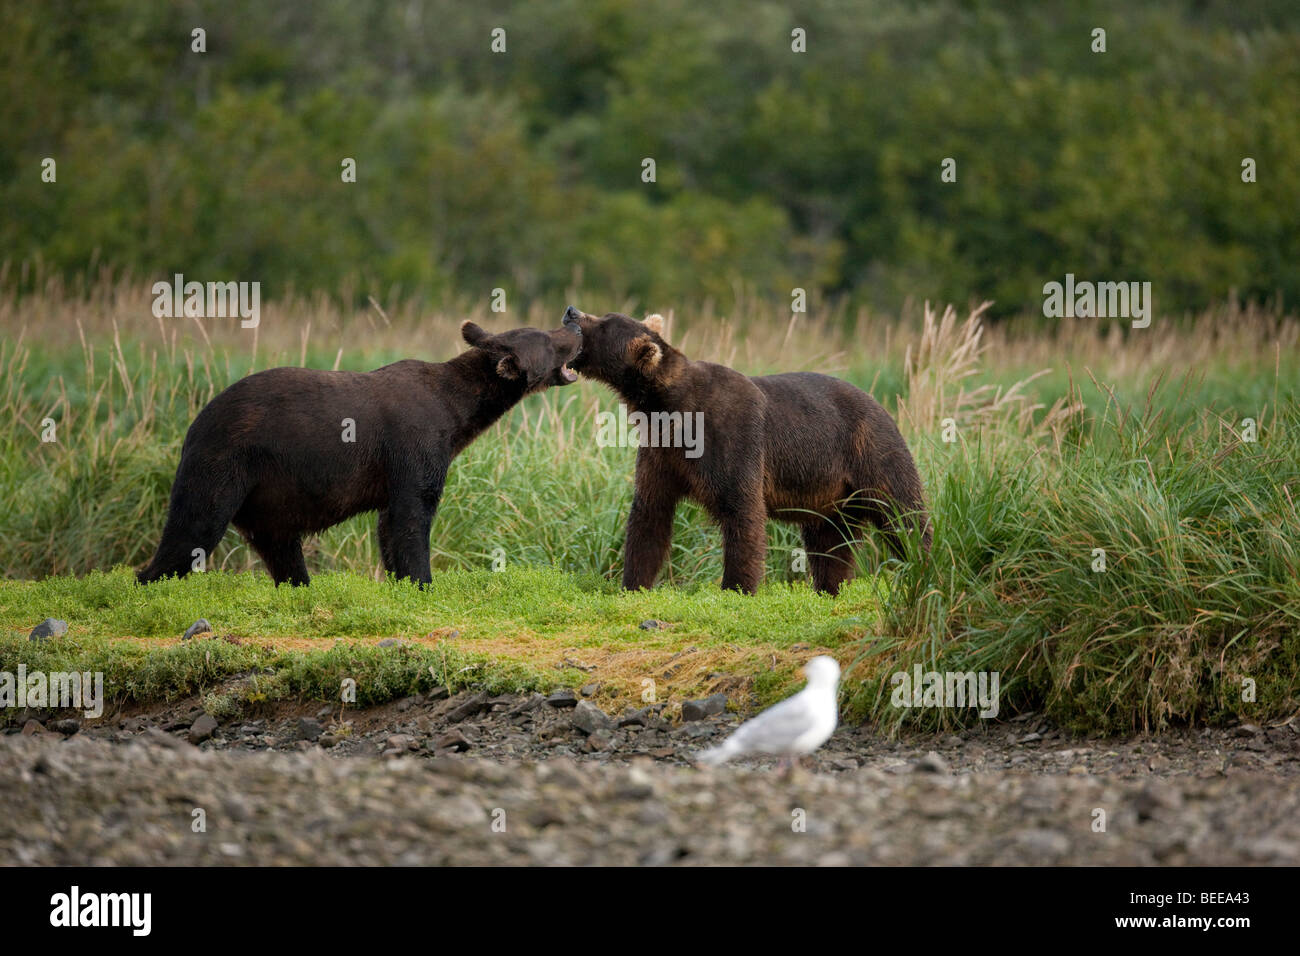 Two grizzly bears playing in green grass in Geographic Bay Katmai National Park Alaska Stock Photo